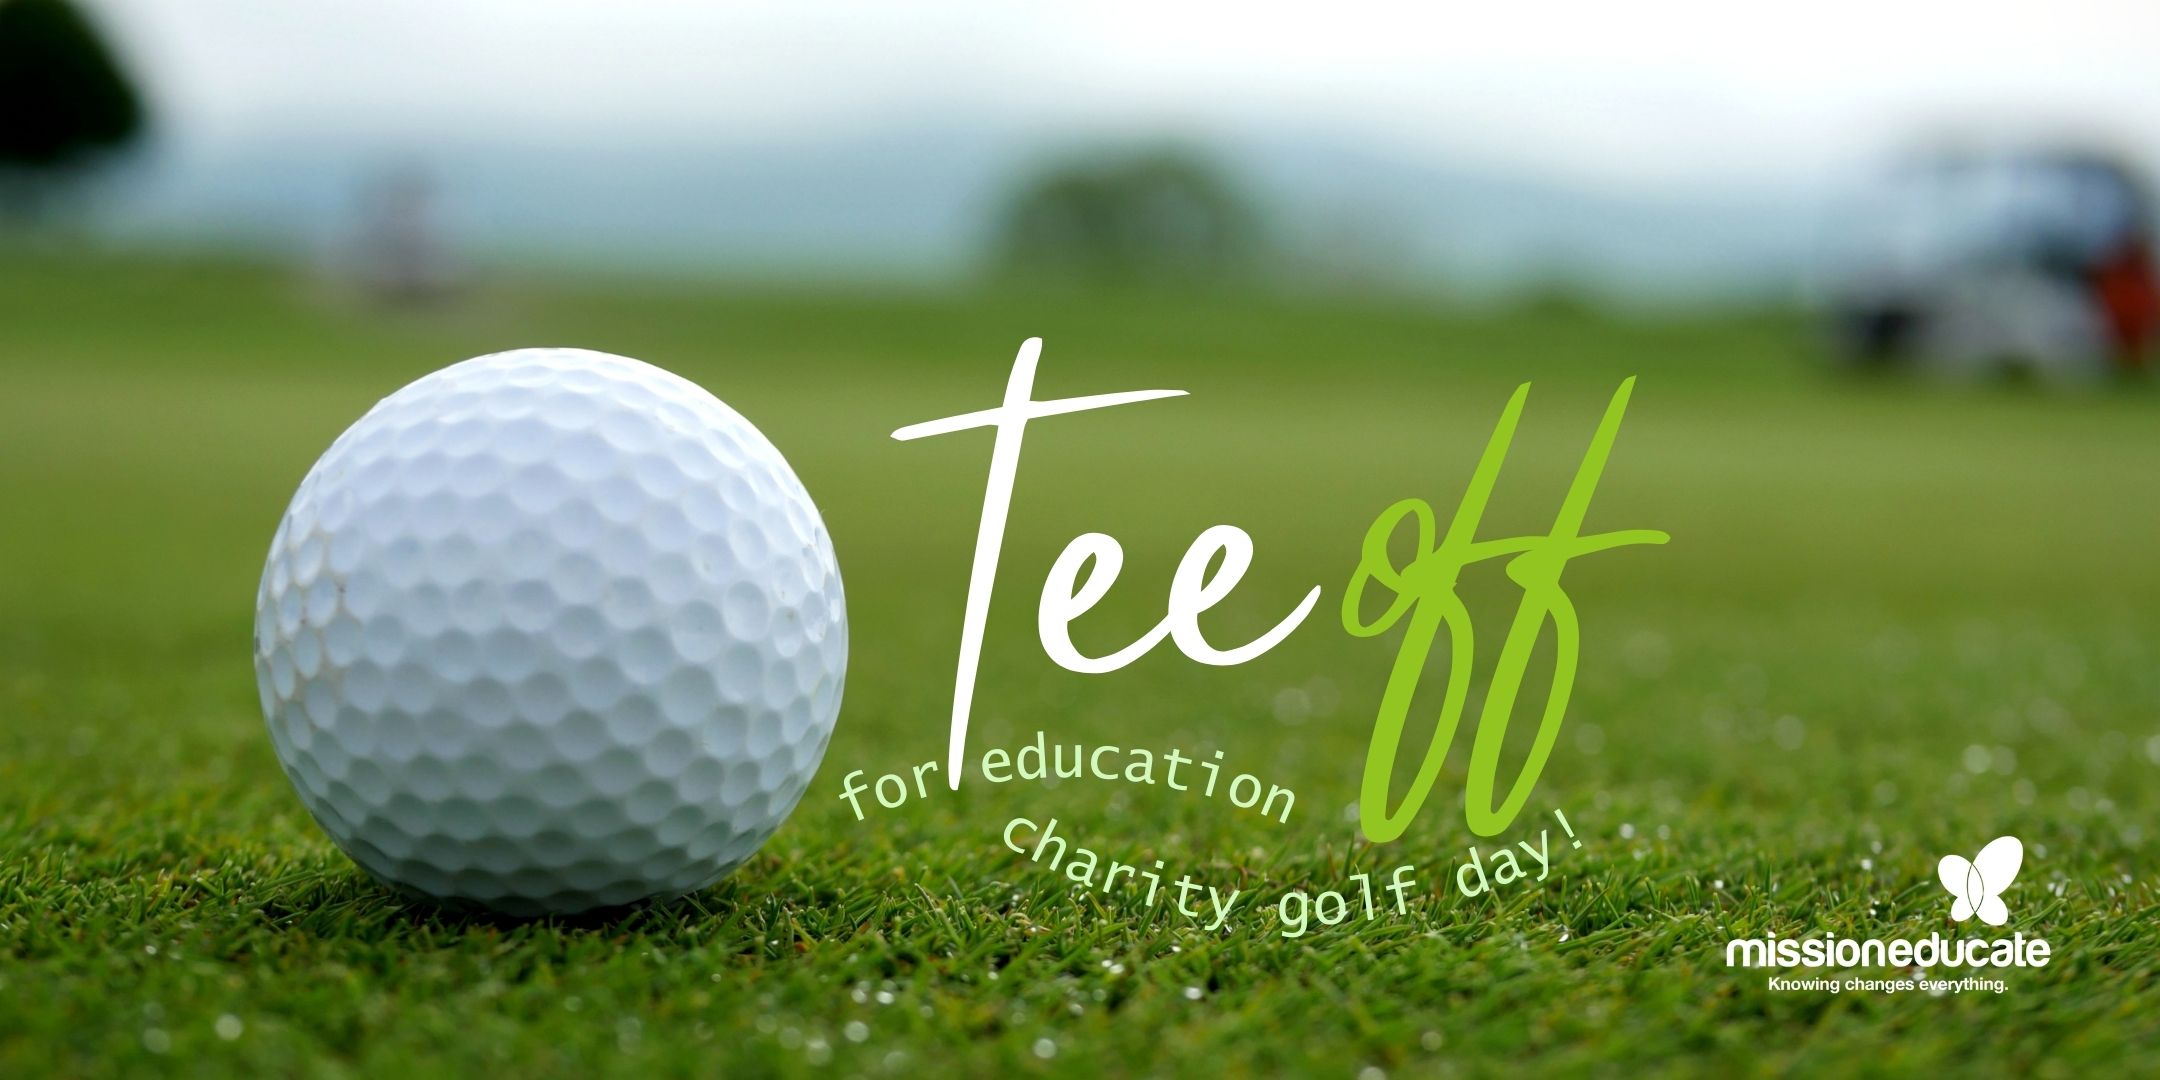 The Tee Off for Education Charity Golf Day is on 22 March at Emerald Lakes Golf Club. Register yourself or a team for a Gold Coast fundraising Ambrose Golf Game raising funds for education in Mozambique.